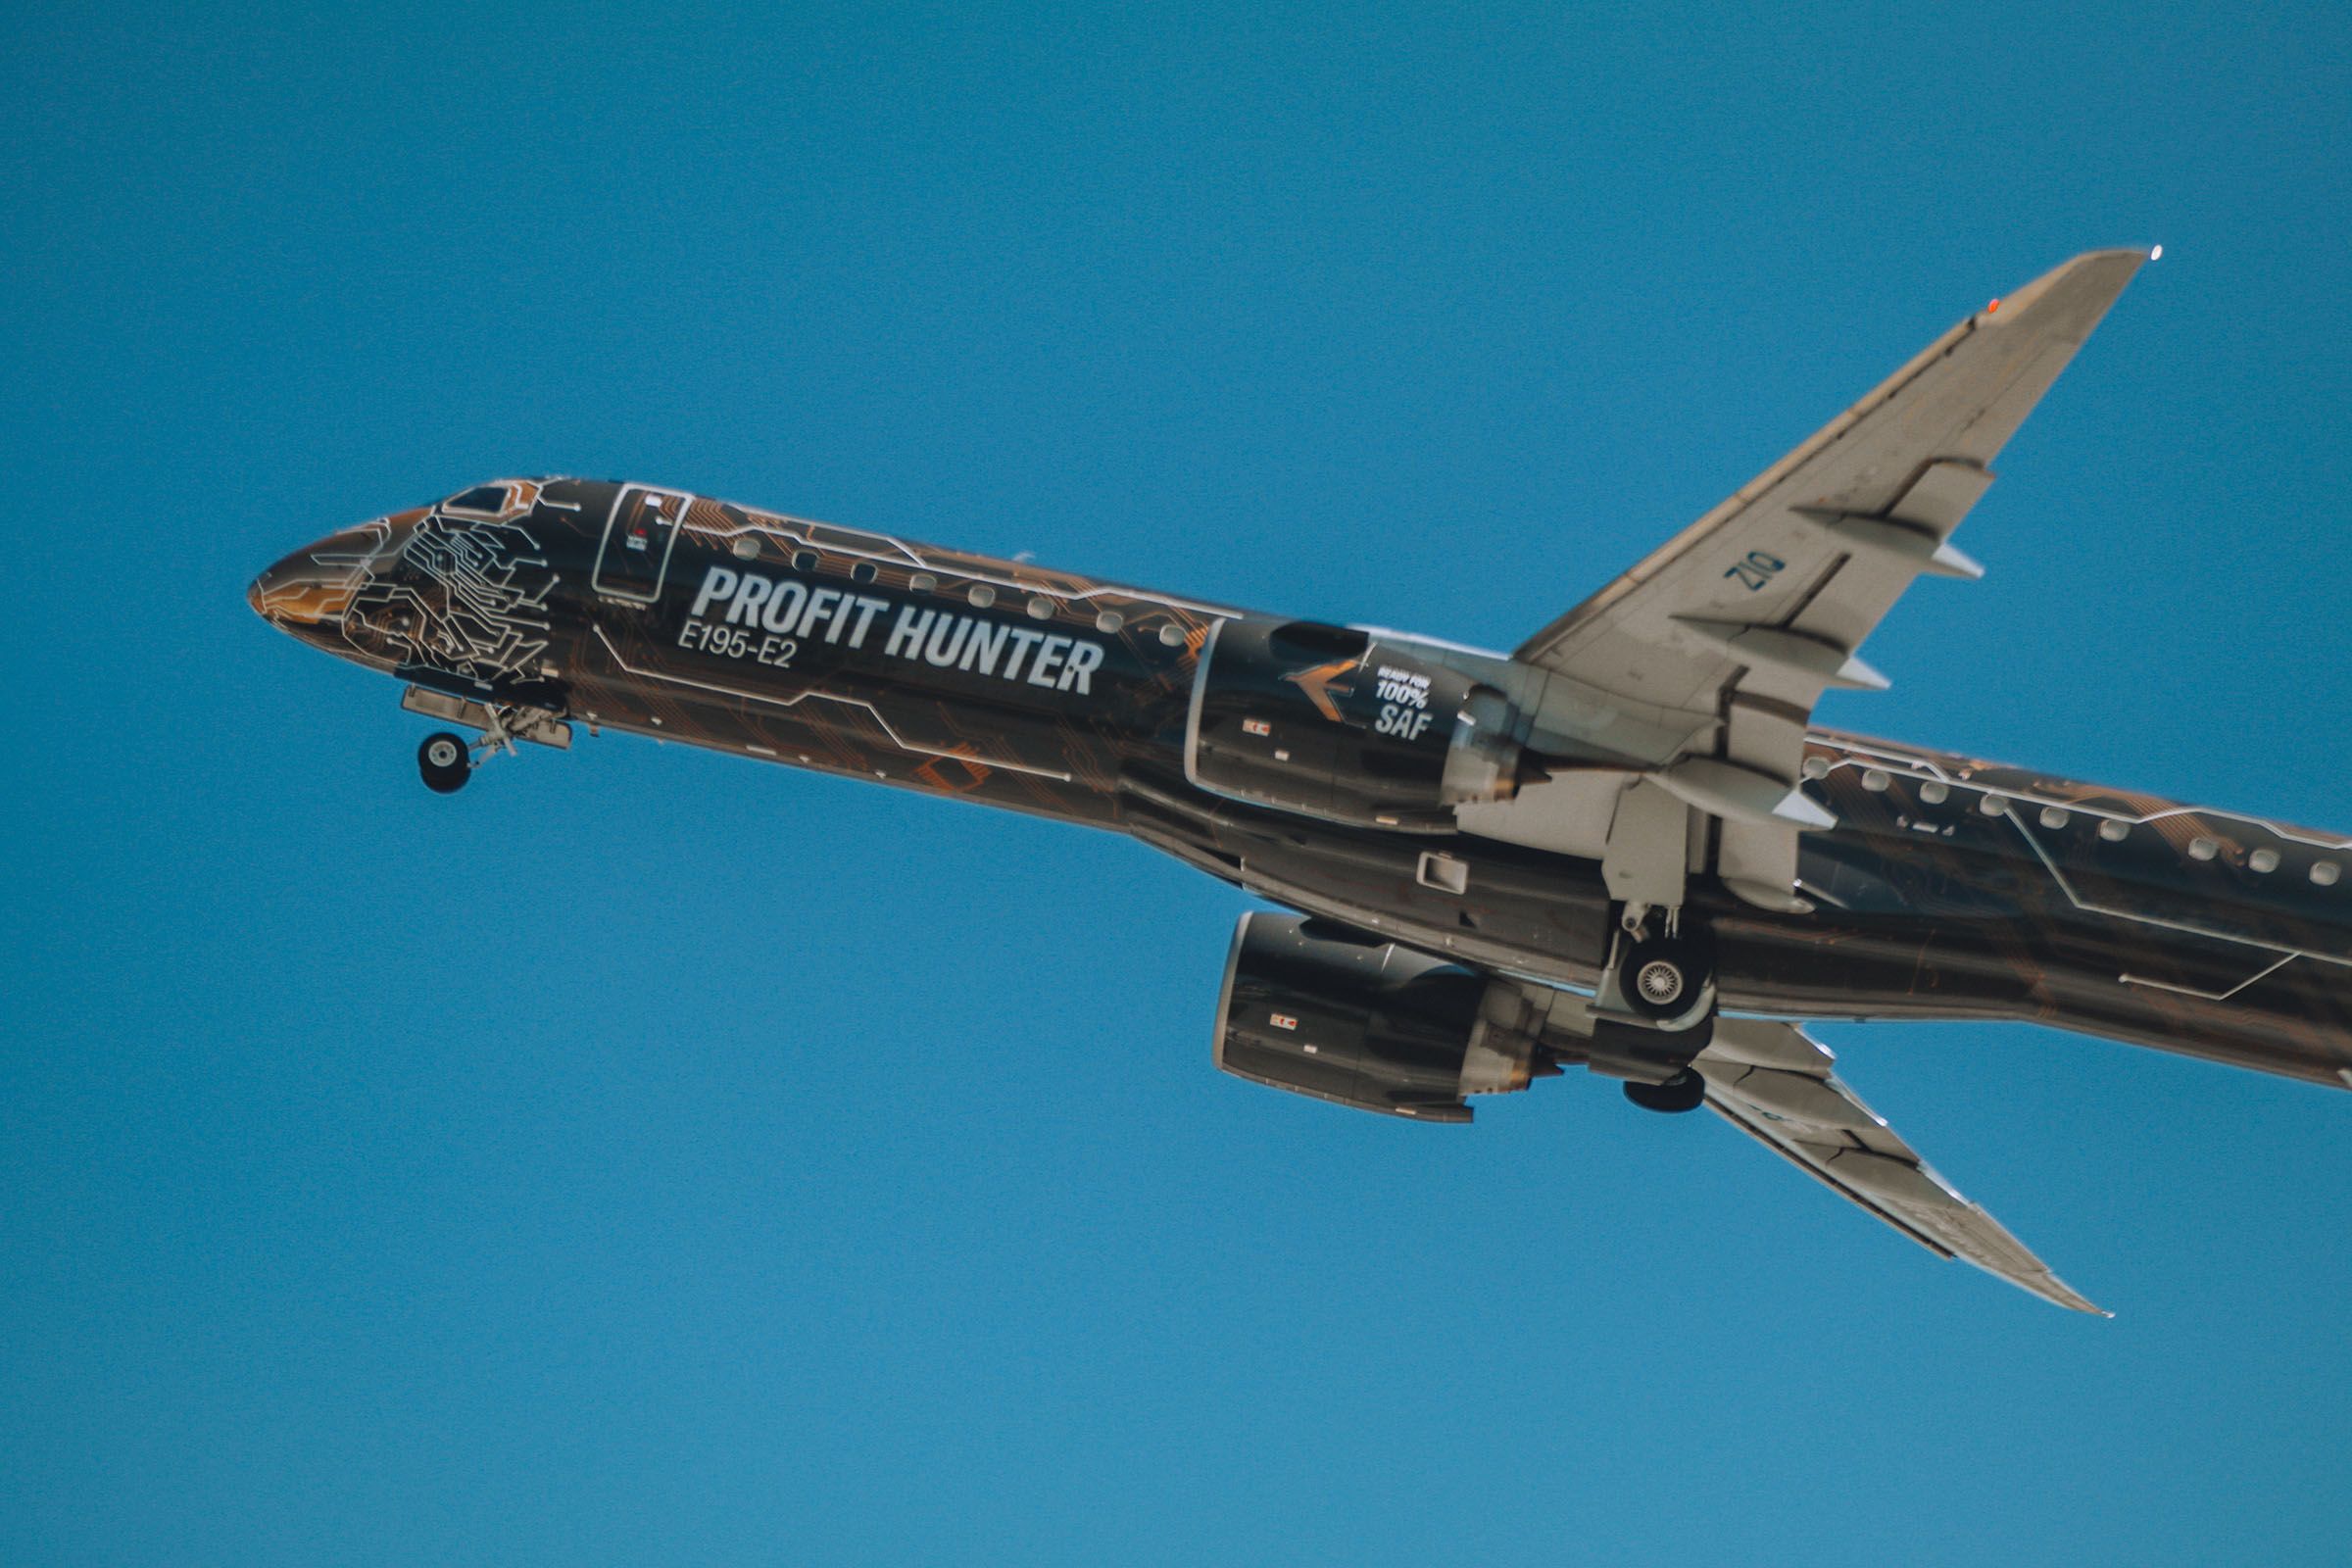 Embraer's Profit Hunter flying around Florida testing an engine running on 100% sustainable aviation uel. 